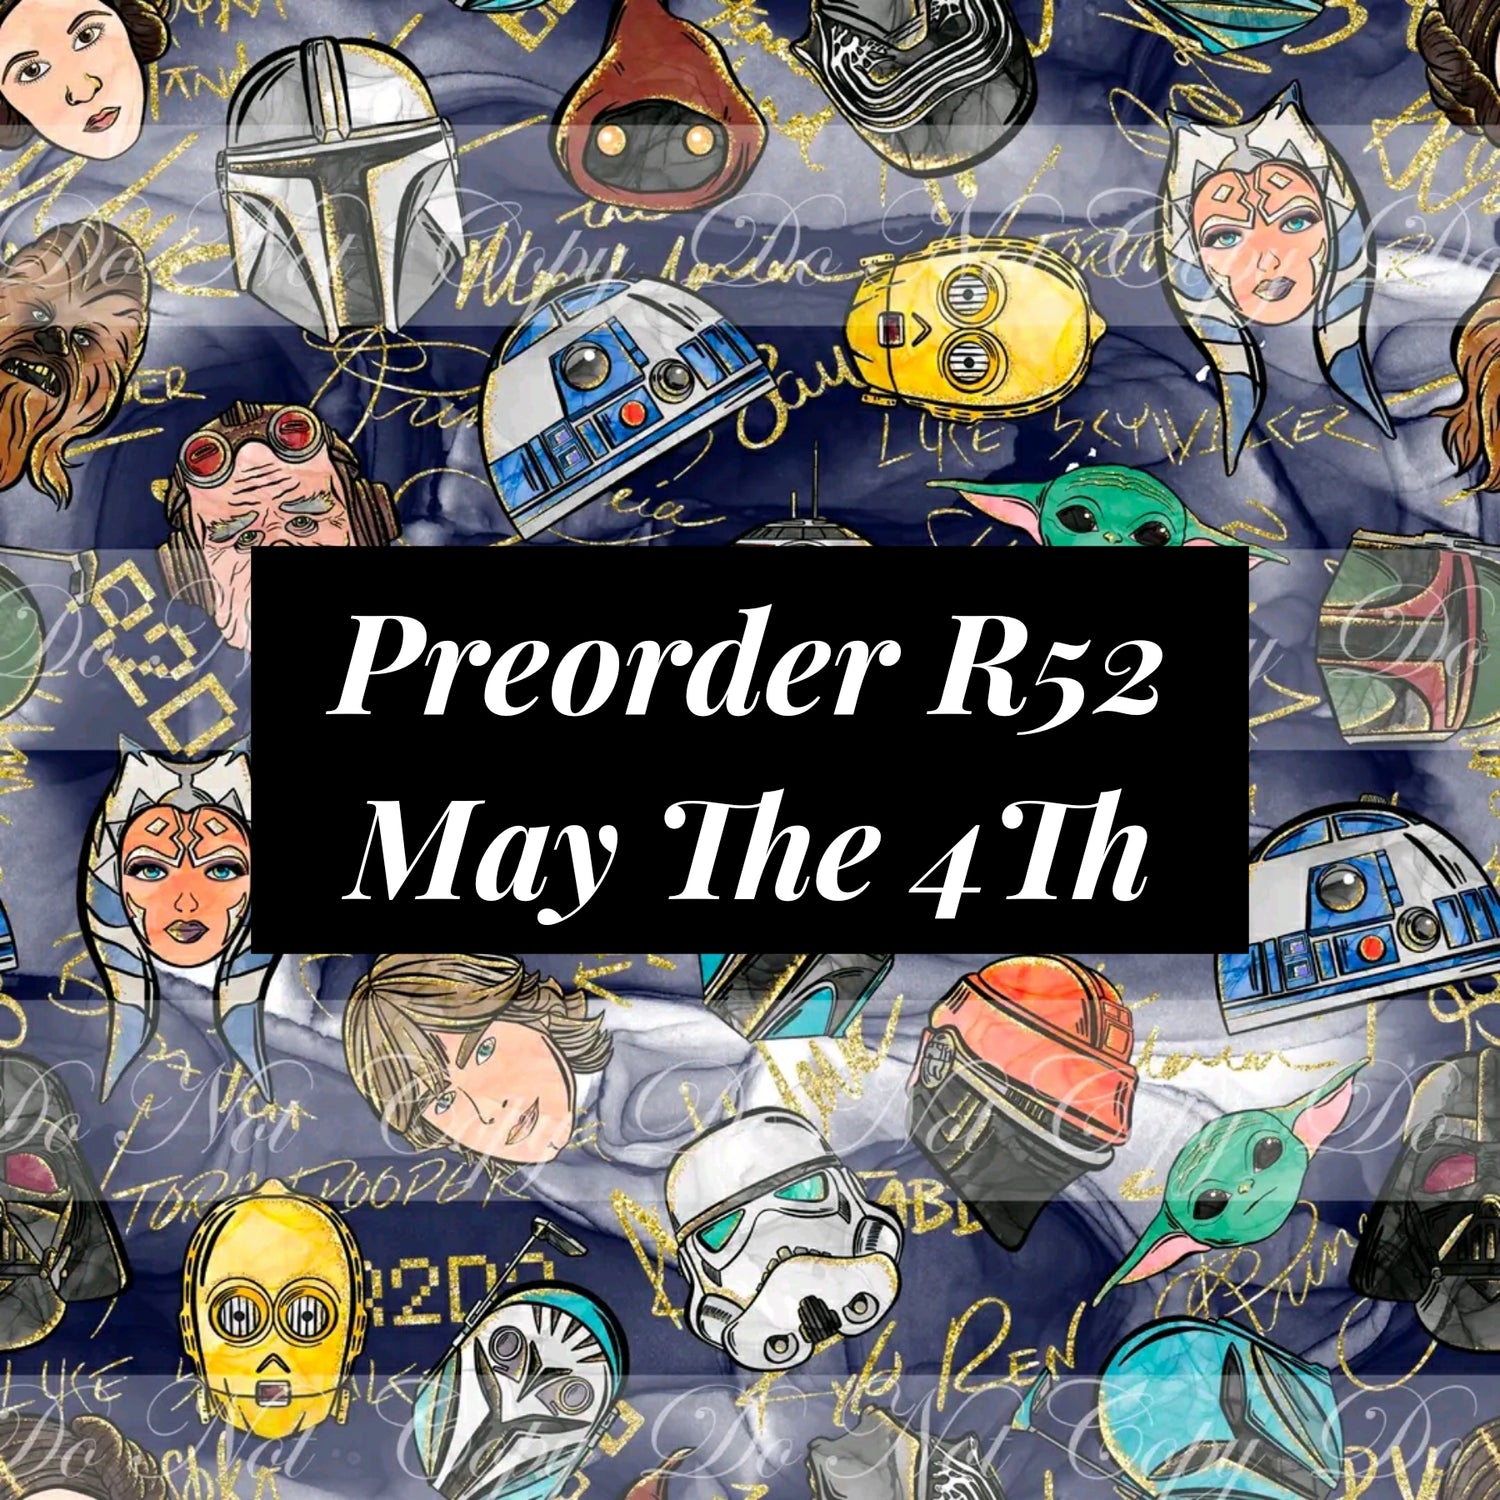 Preorder R52 May The 4TH